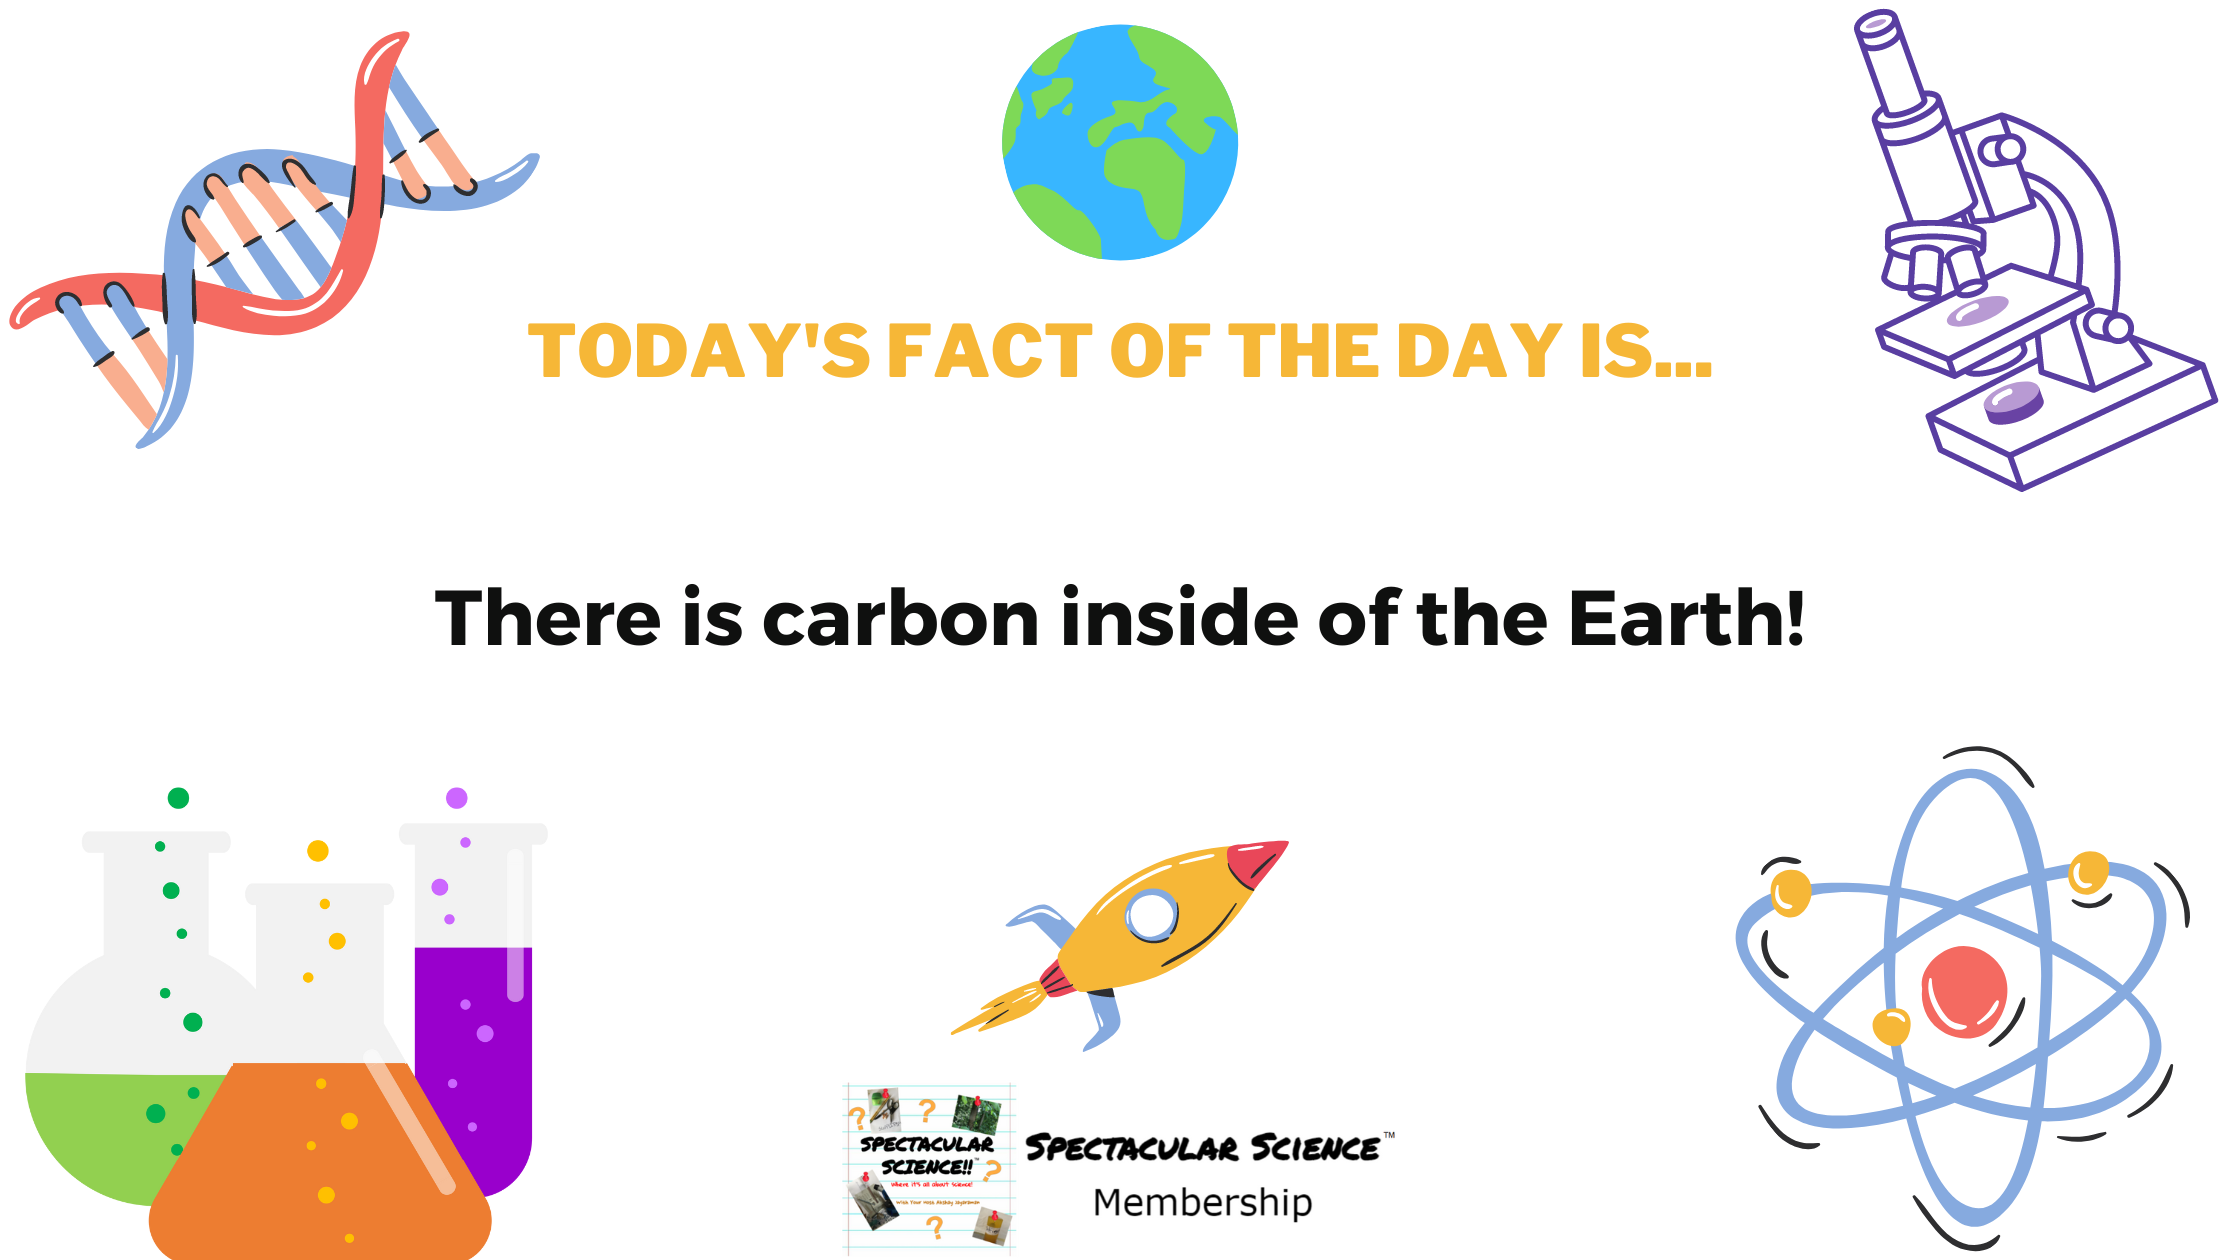 Fact of the Day Image July 26th